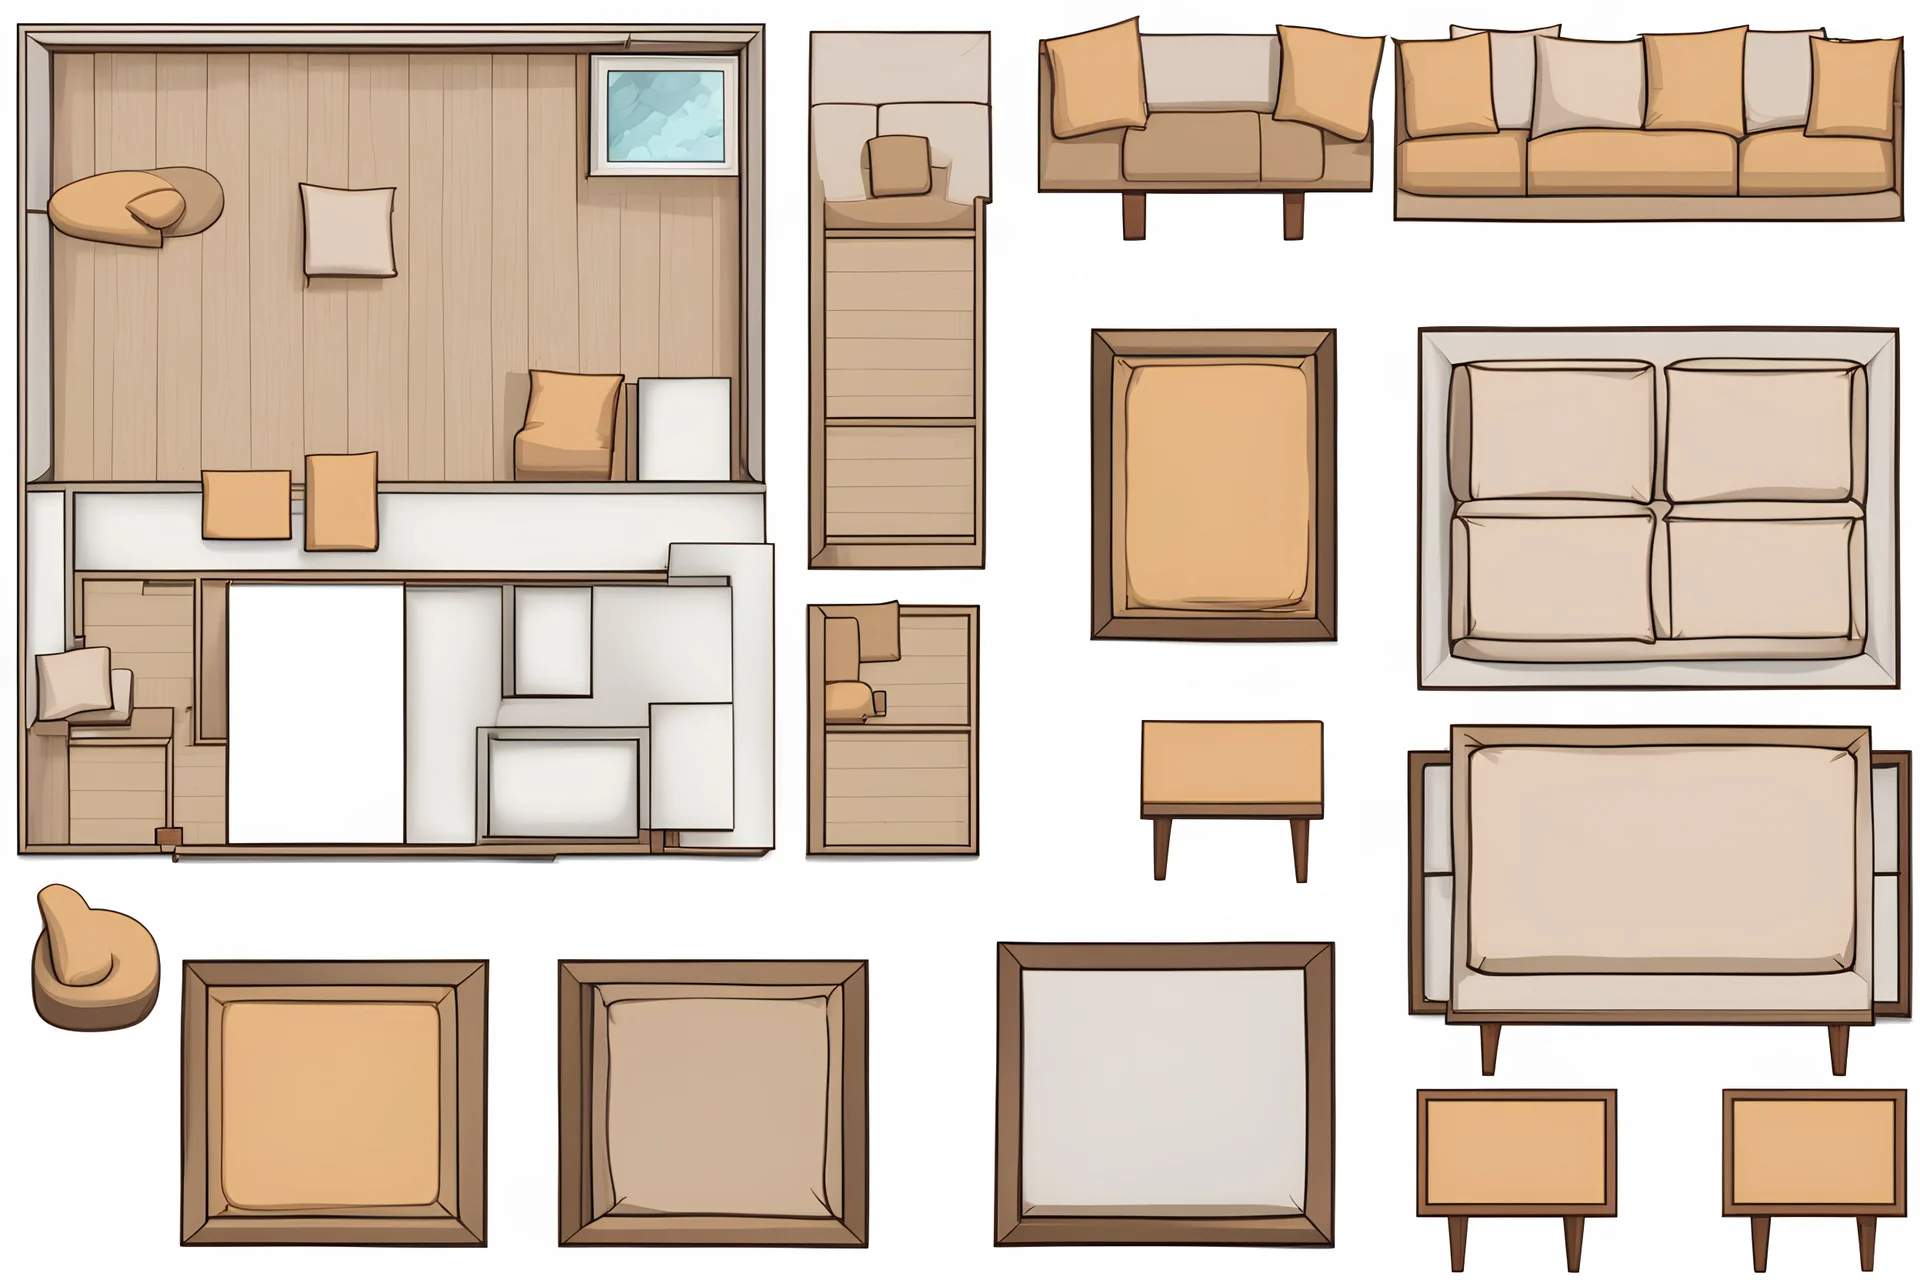 Sprite sheet, furniture, architectural plan, couch, table, chair, top view,